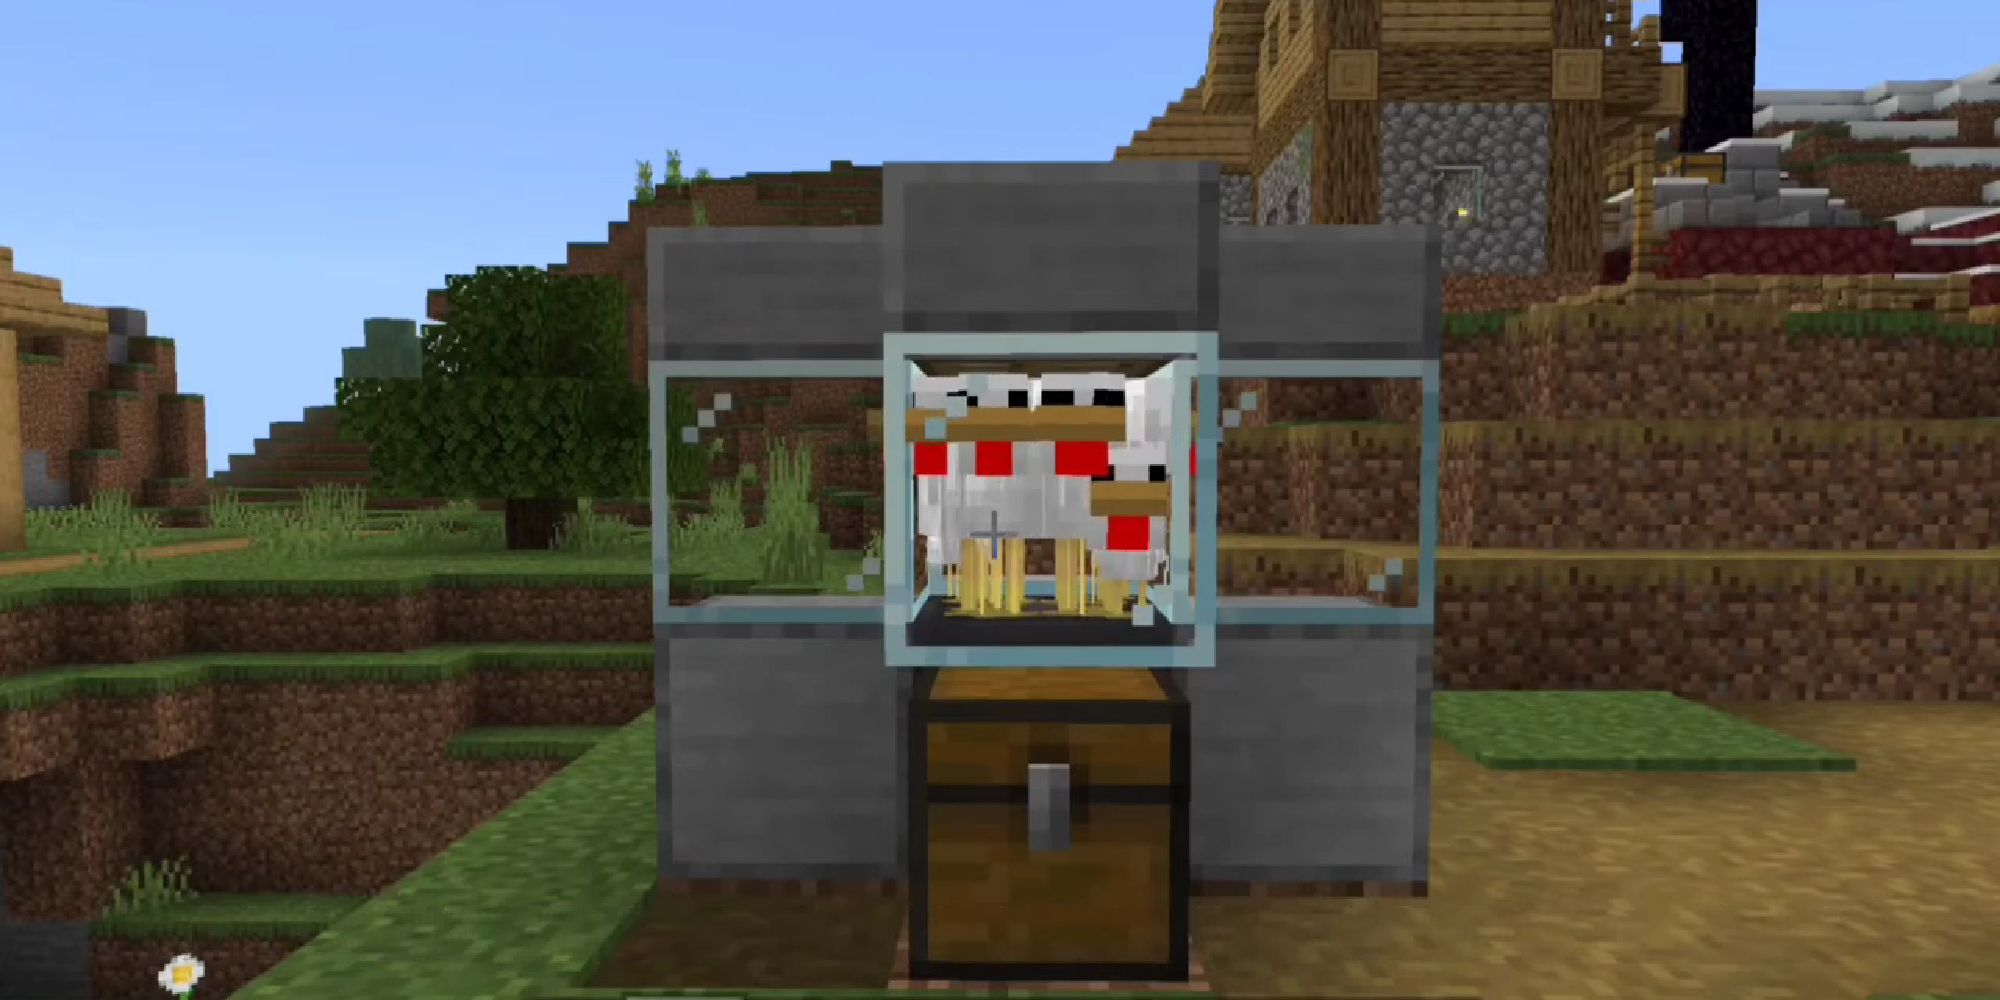 minecraft egg farm with chickens in closed area